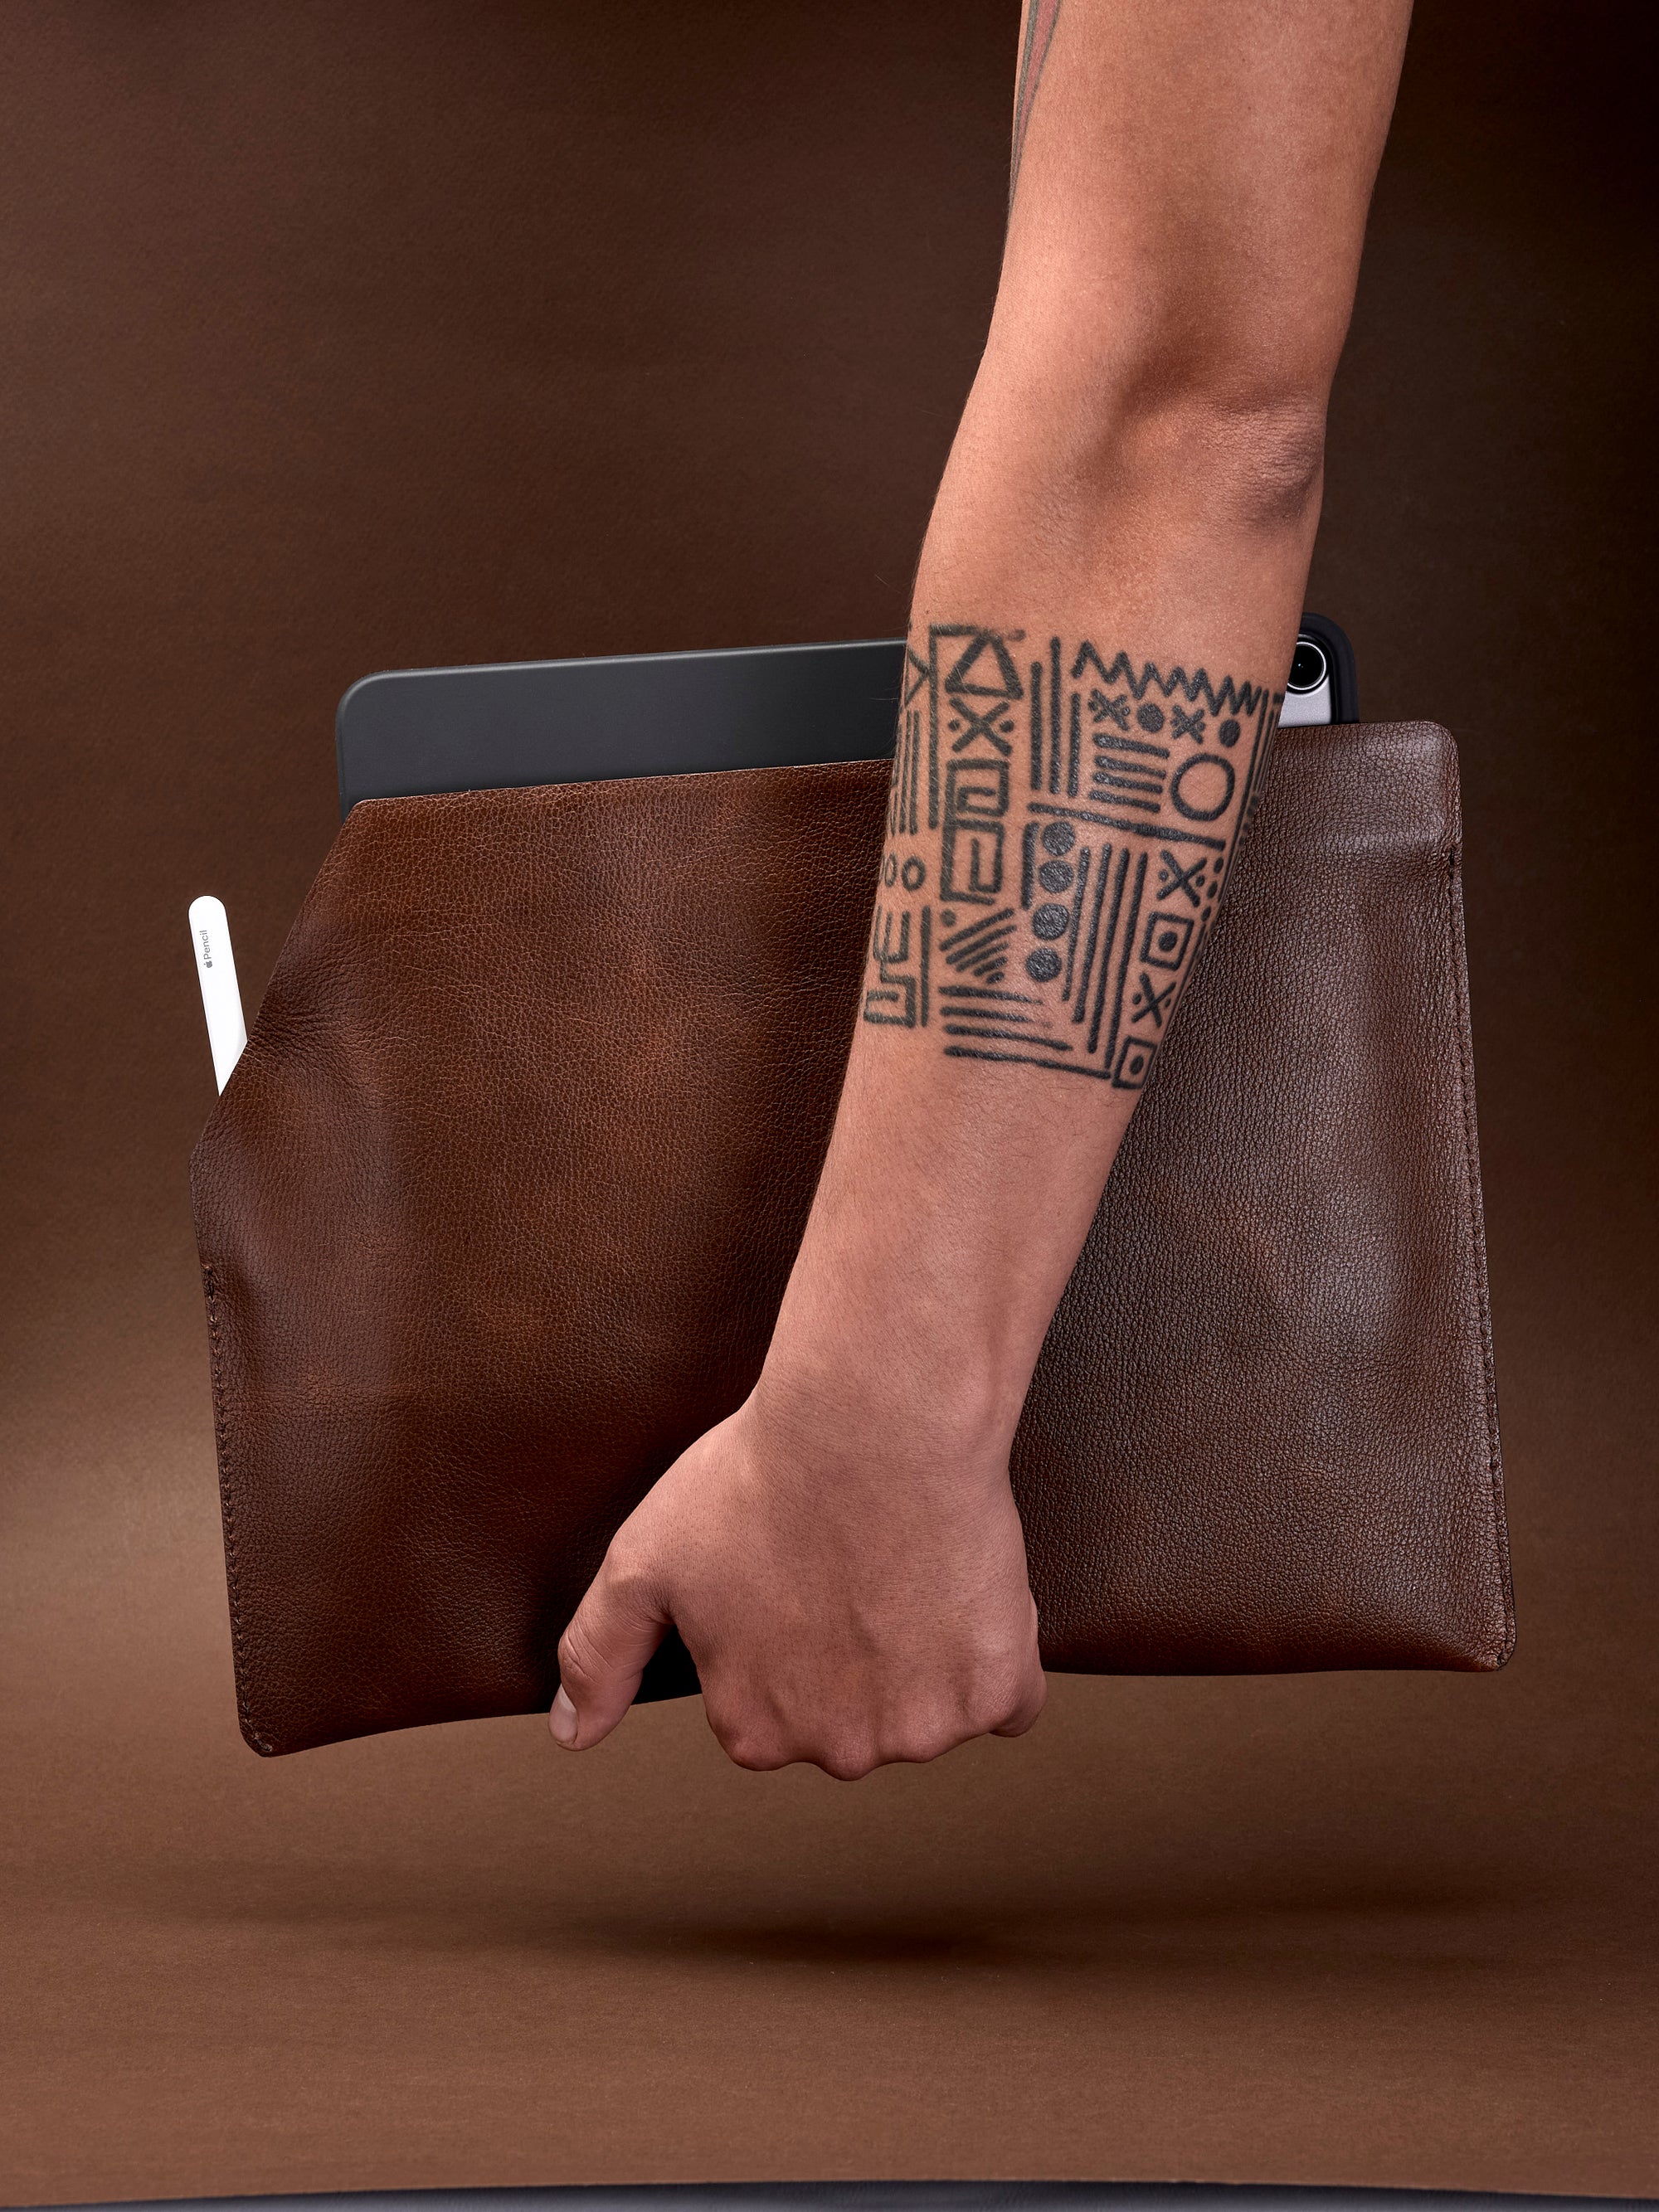 Style. Draftsman 7 iPad Sleeve Cover Brown, iPad Pro 11-inch, iPad Pro 12.9-inch, M1 Chip by Capra Leather